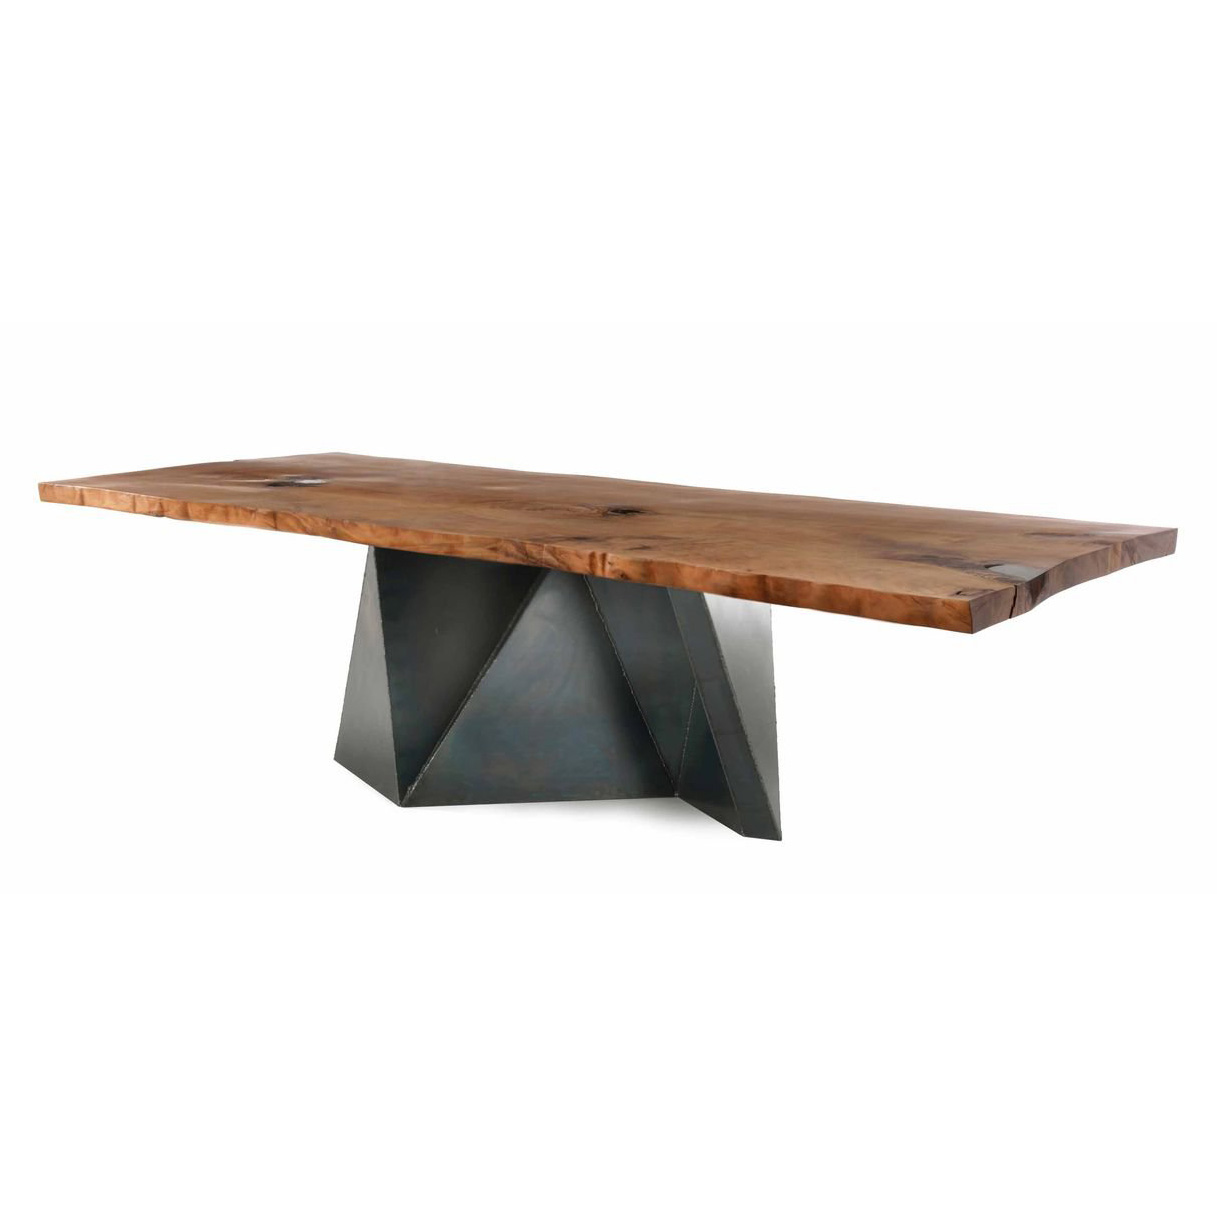 Kauri Ooki dining table from Riva 1920